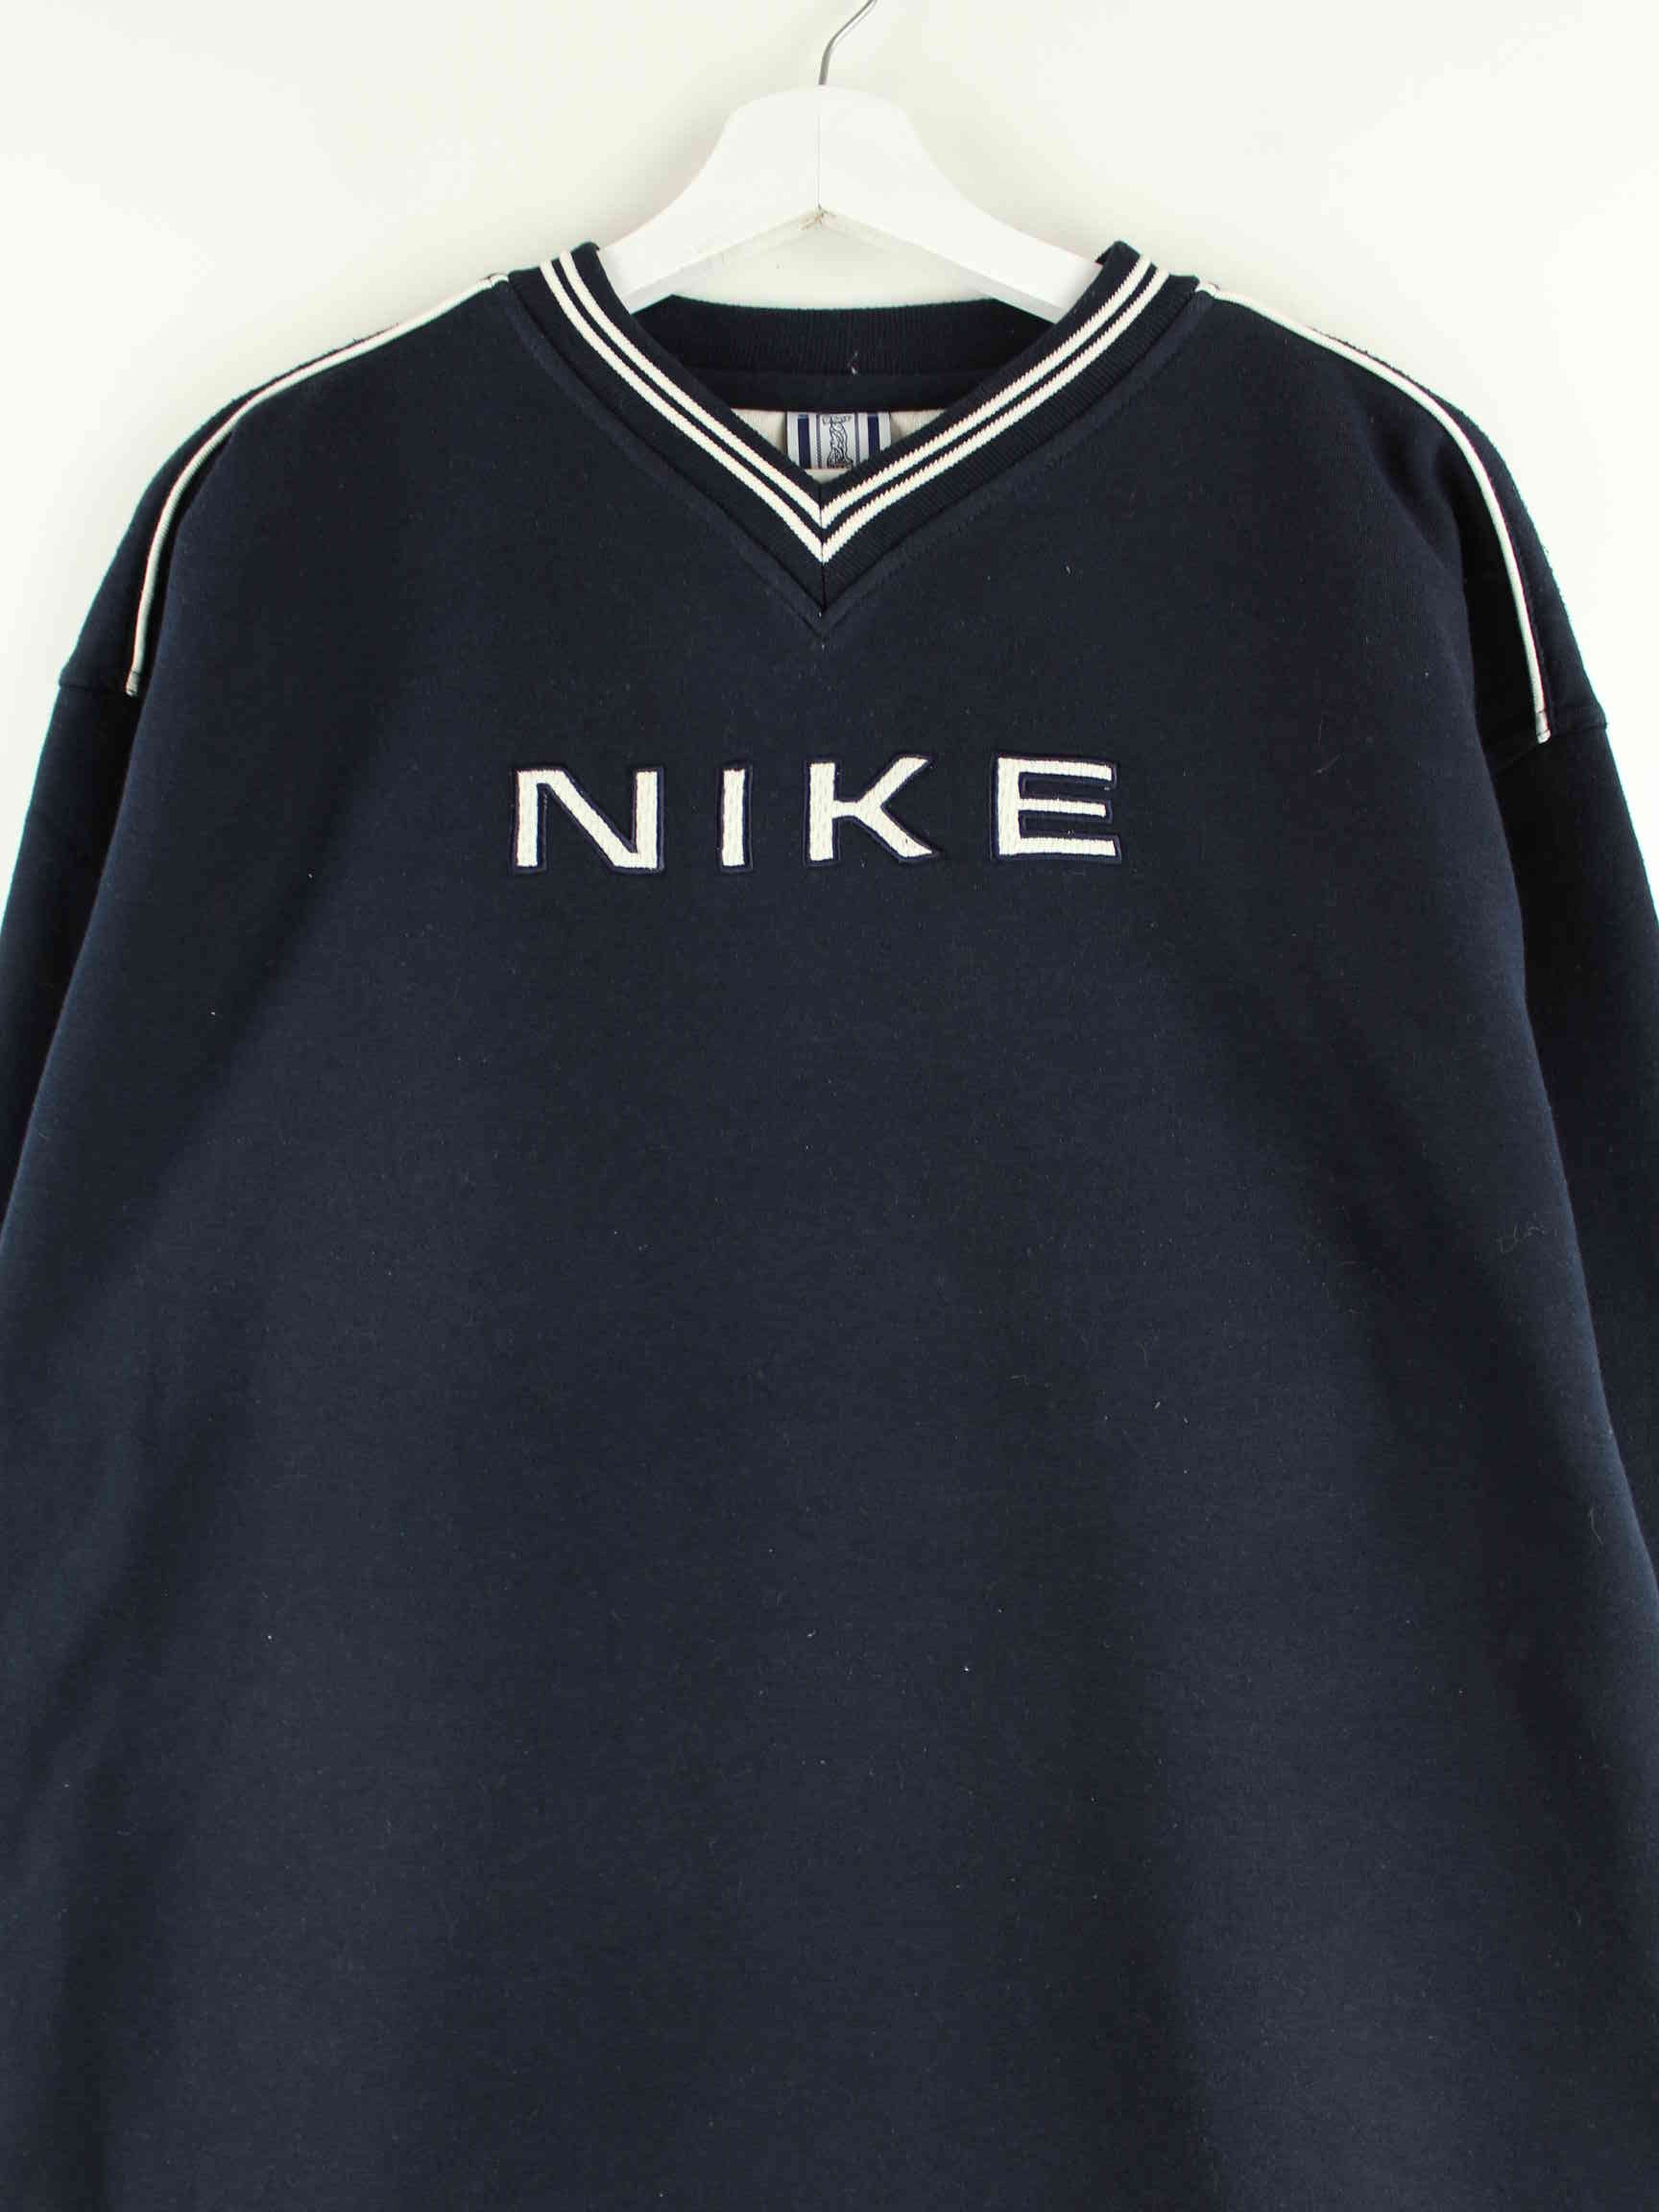 Nike 90s Vintage Spellout Embroidered V-Neck Sweater Blau L (detail image 1)